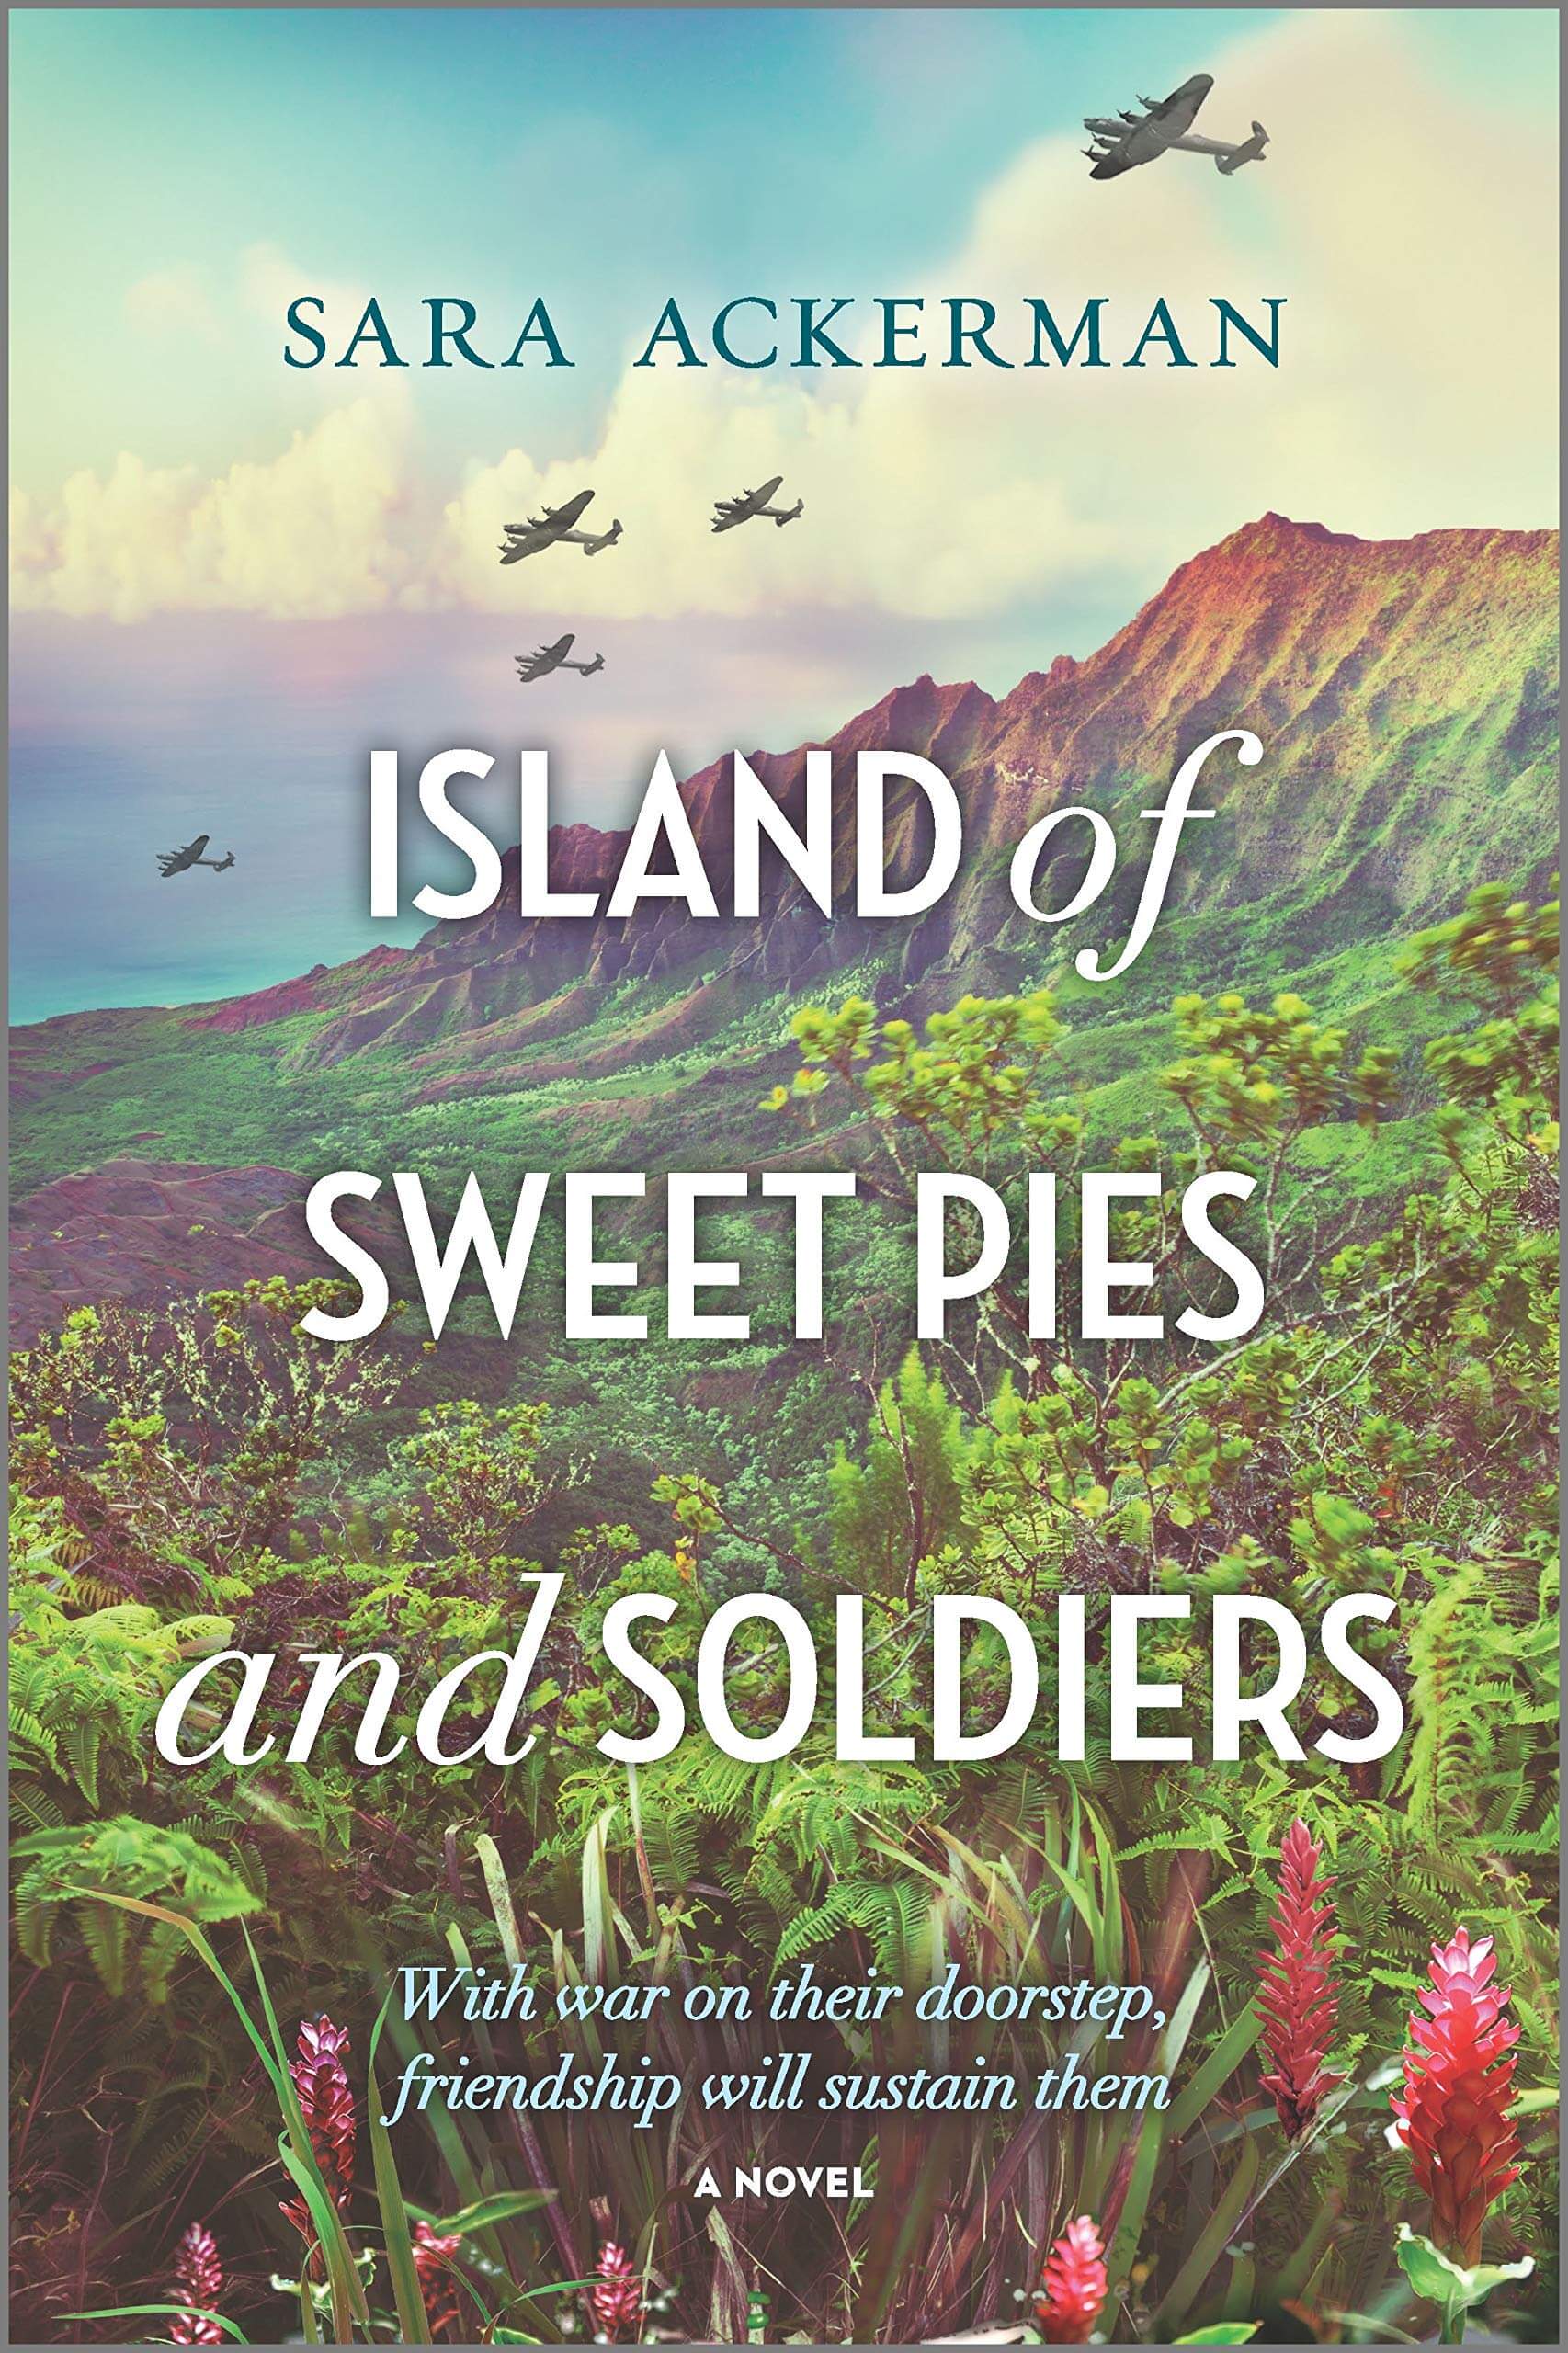 Cover of Island of Sweet Pies and Soldiers by Sara Ackerman